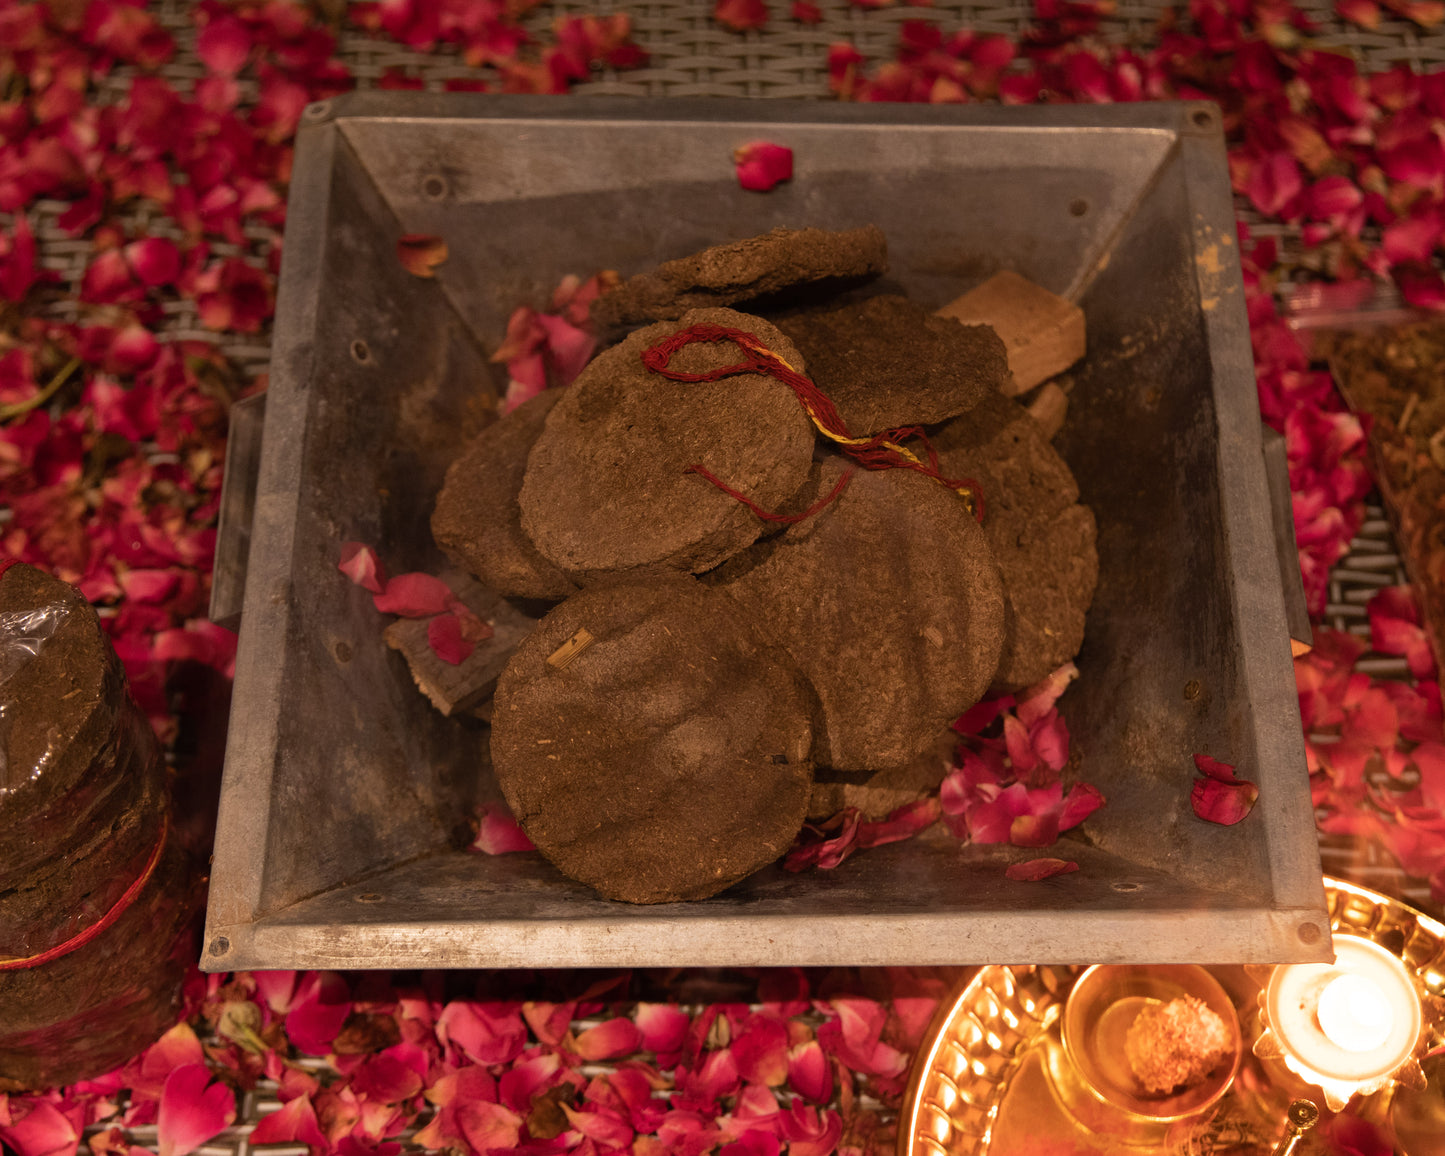 LeelaTheStore's Cow Dung Kande are made from the pure and natural dung of sacred cows.